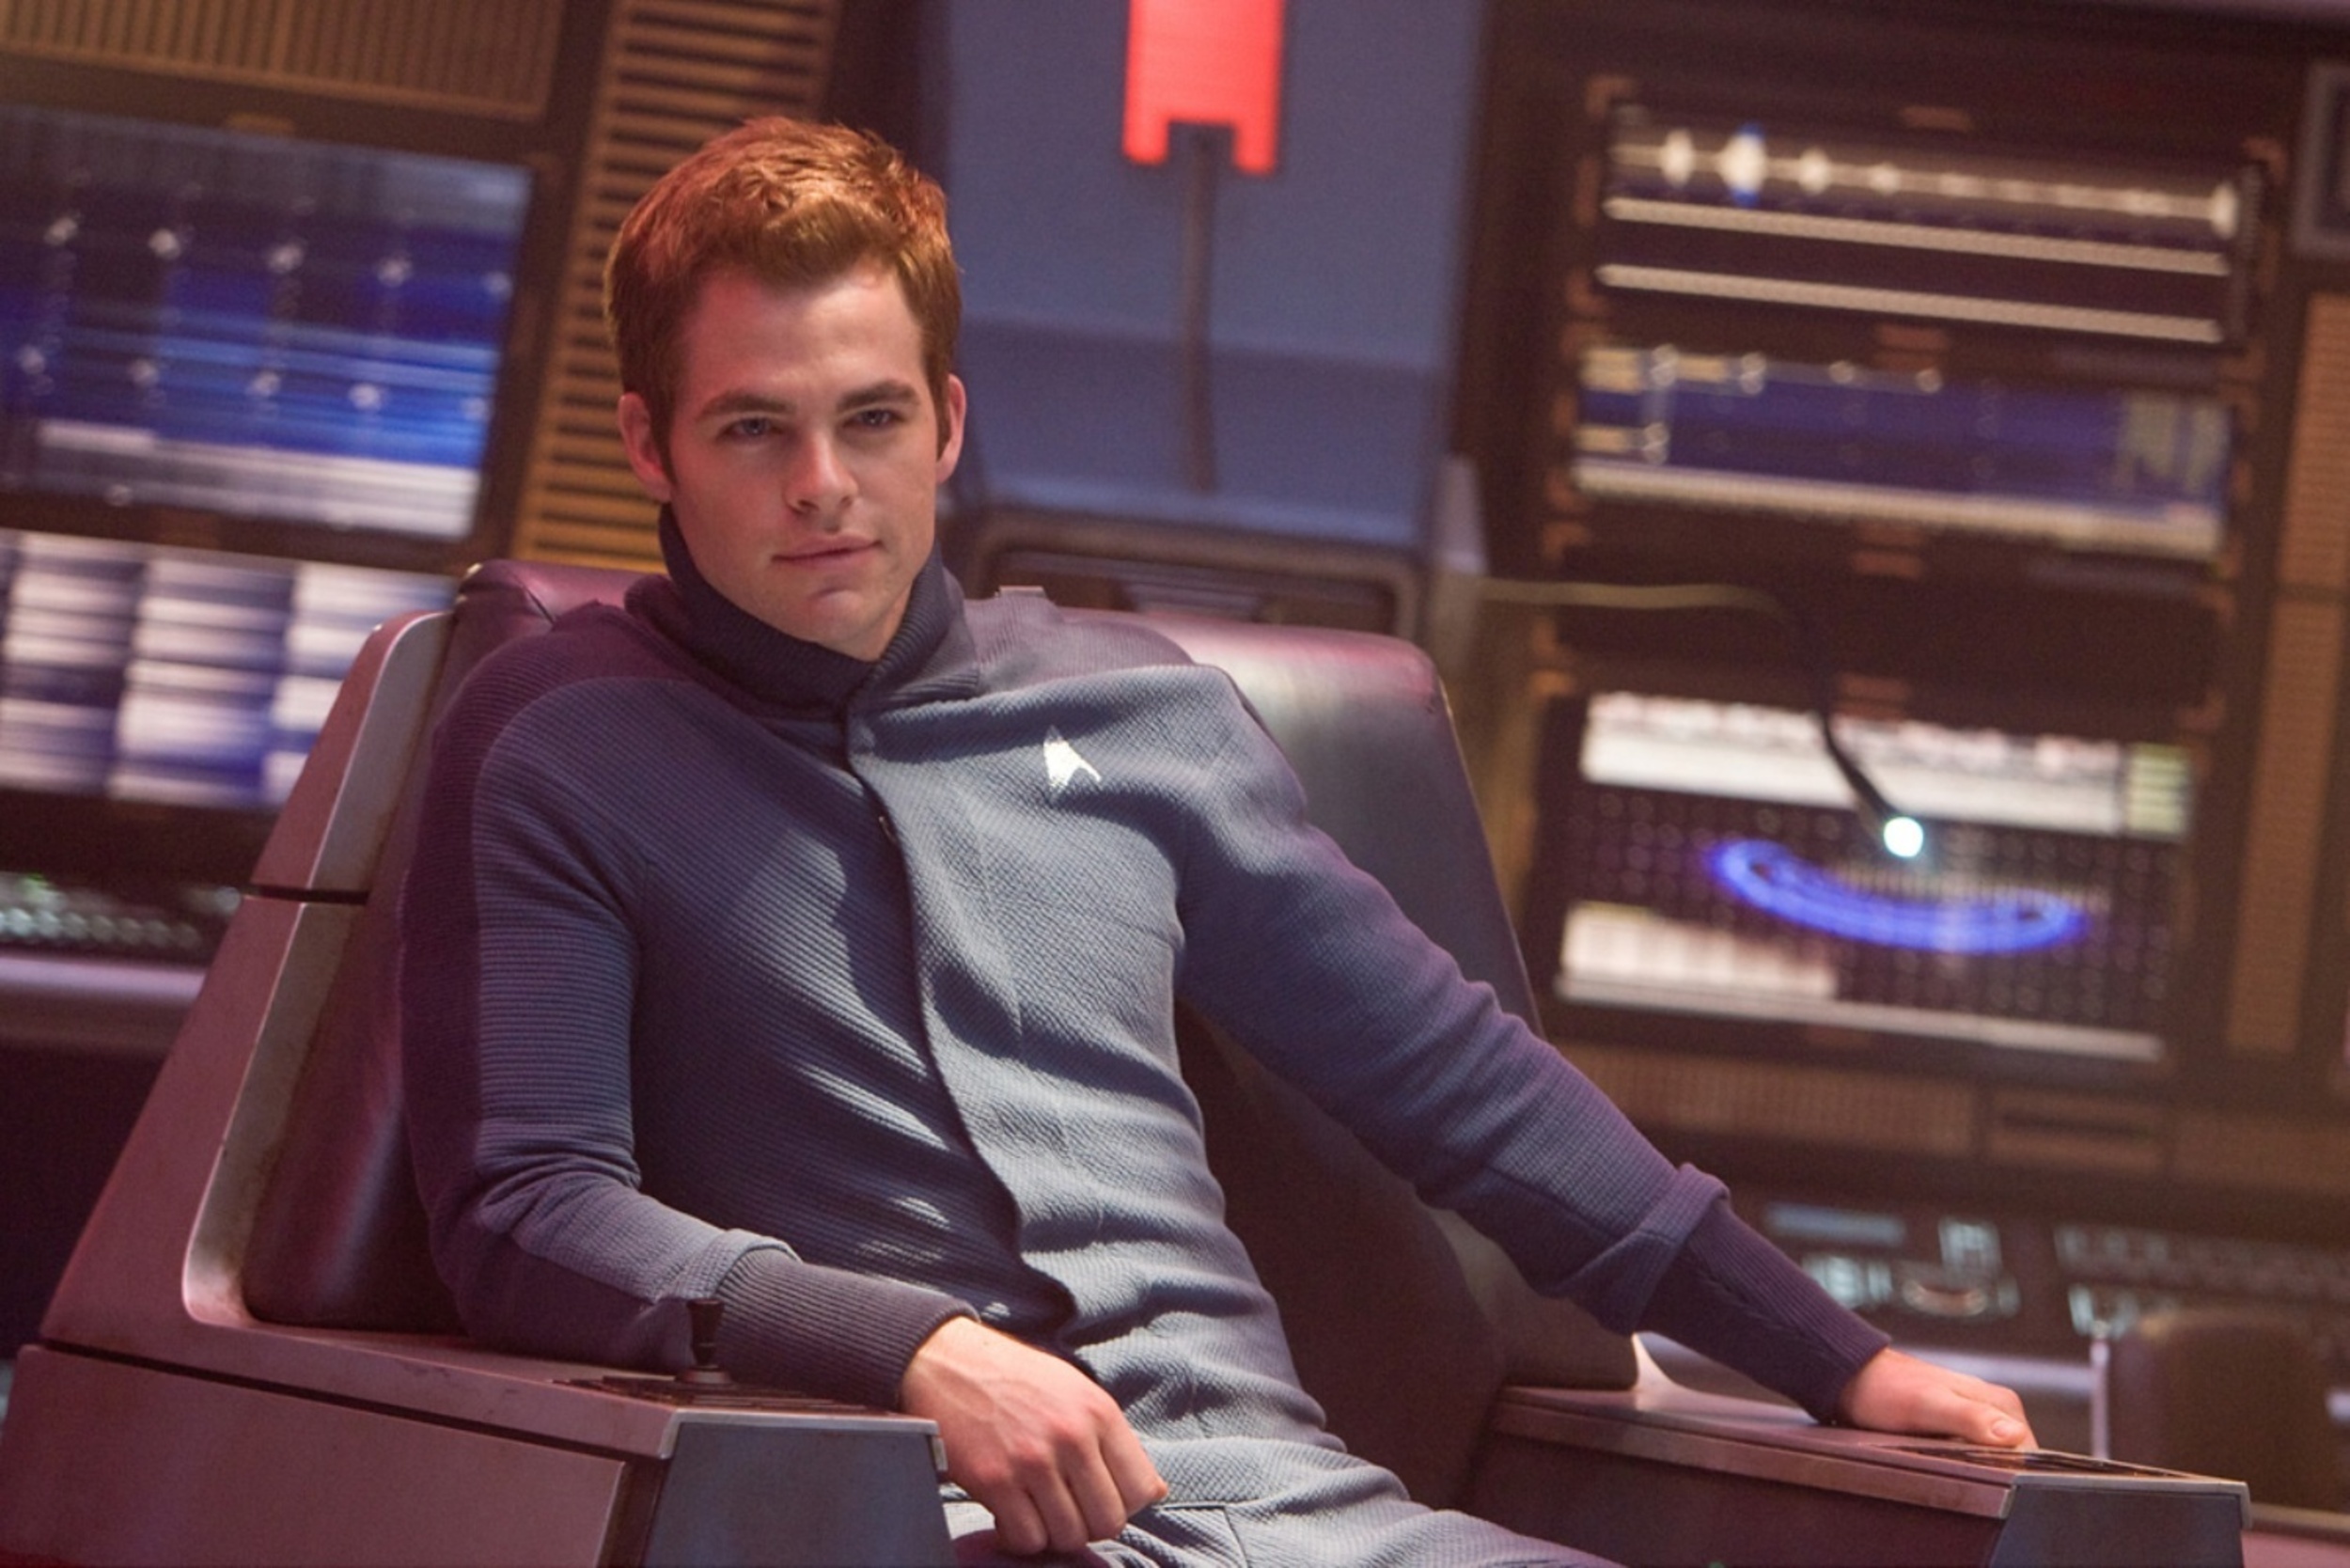 <p>Pine has admitted to totally flubbing his first audition to play the role of James T. Kirk. Apparently, it was so bad that Abrams wasn’t even shown his audition. Then, Pine’s agent met Abrams’ wife, and one thing led to another. Pine got to audition opposite Zachary Quinto, who ended up playing Spock. Quinto threw his backing behind Pine, and he got the role.</p><p><a href='https://www.msn.com/en-us/community/channel/vid-cj9pqbr0vn9in2b6ddcd8sfgpfq6x6utp44fssrv6mc2gtybw0us'>Follow us on MSN to see more of our exclusive entertainment content.</a></p>